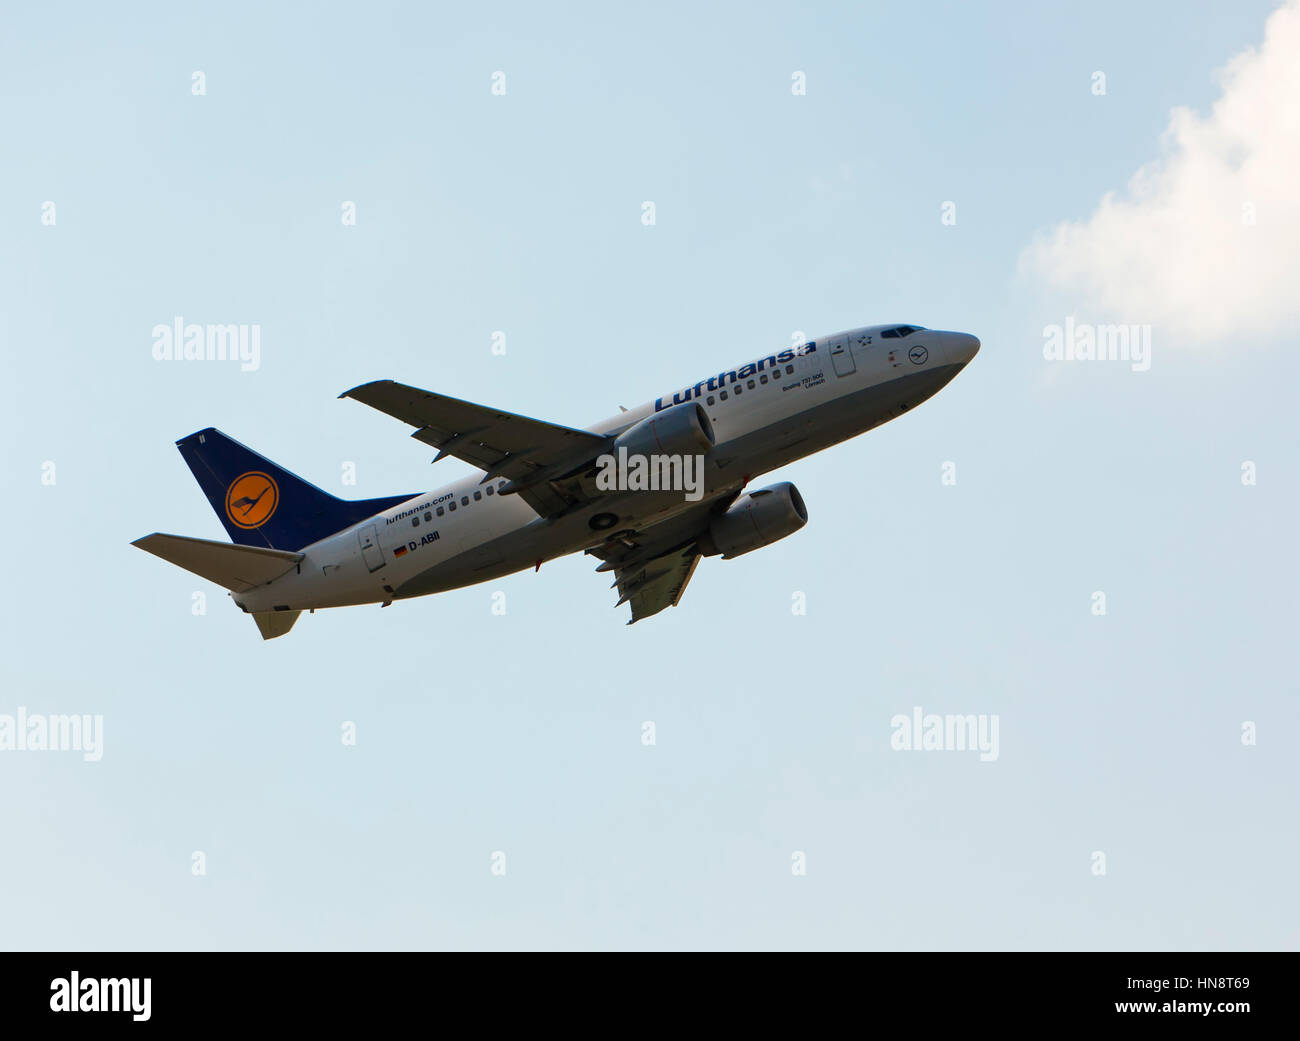 Lufthansa Airbus after take-off from DUS Airport Stock Photo